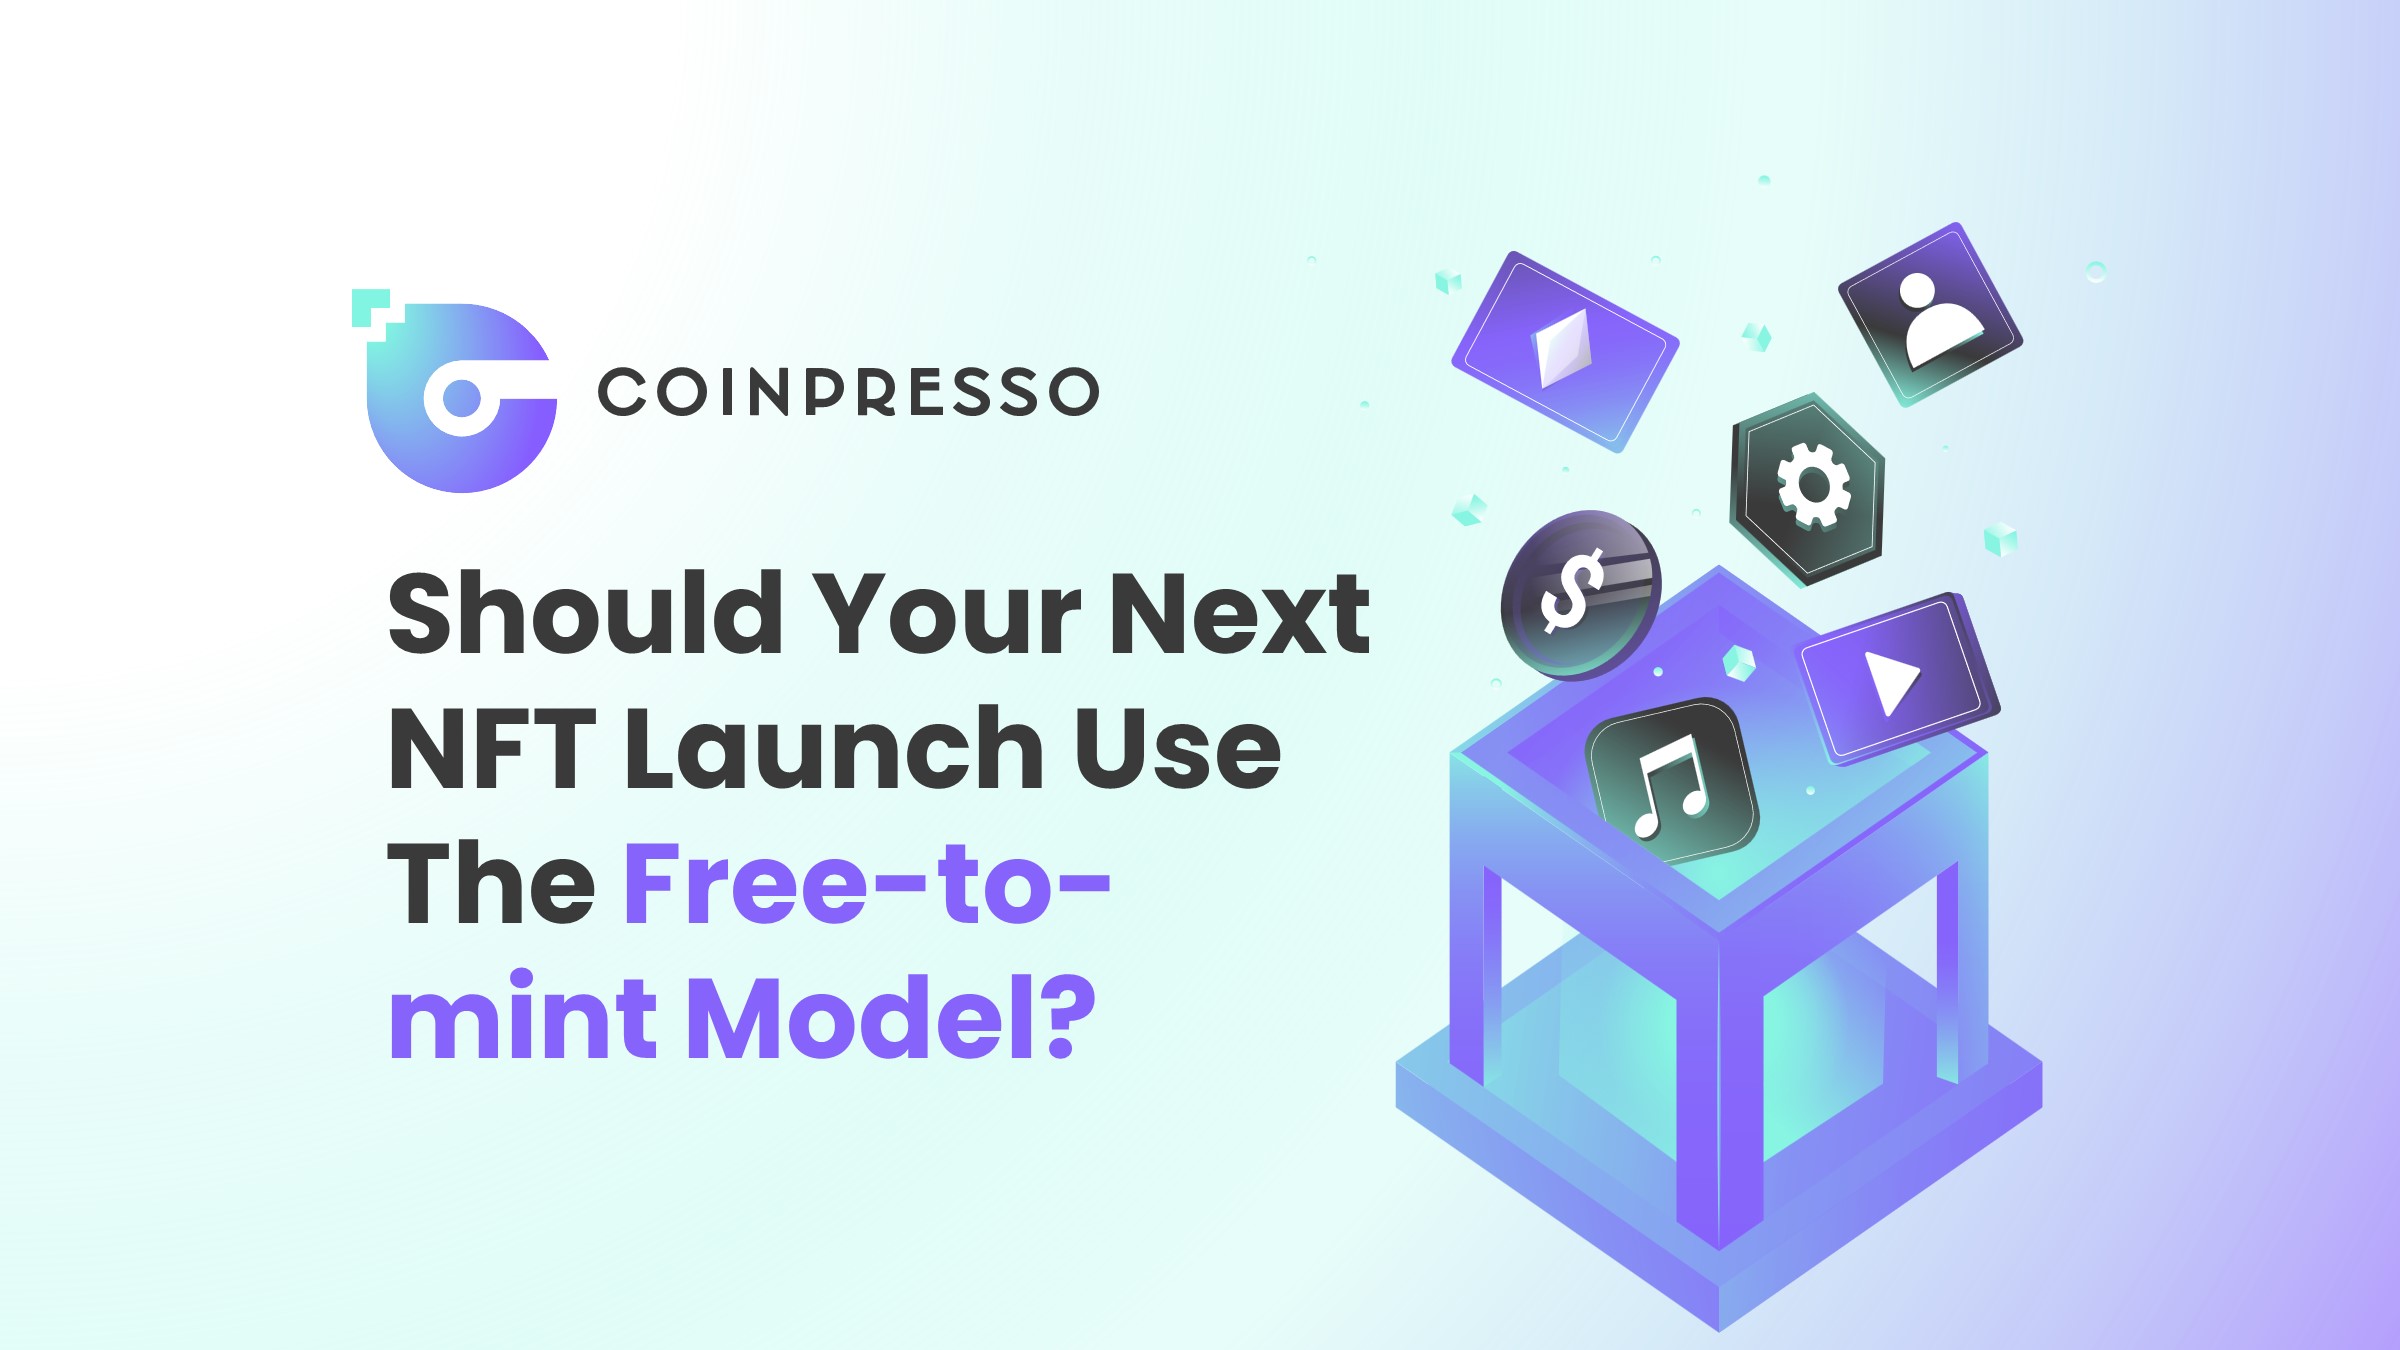 Should Your Next NFT Launch Use The Free-to-mint Model